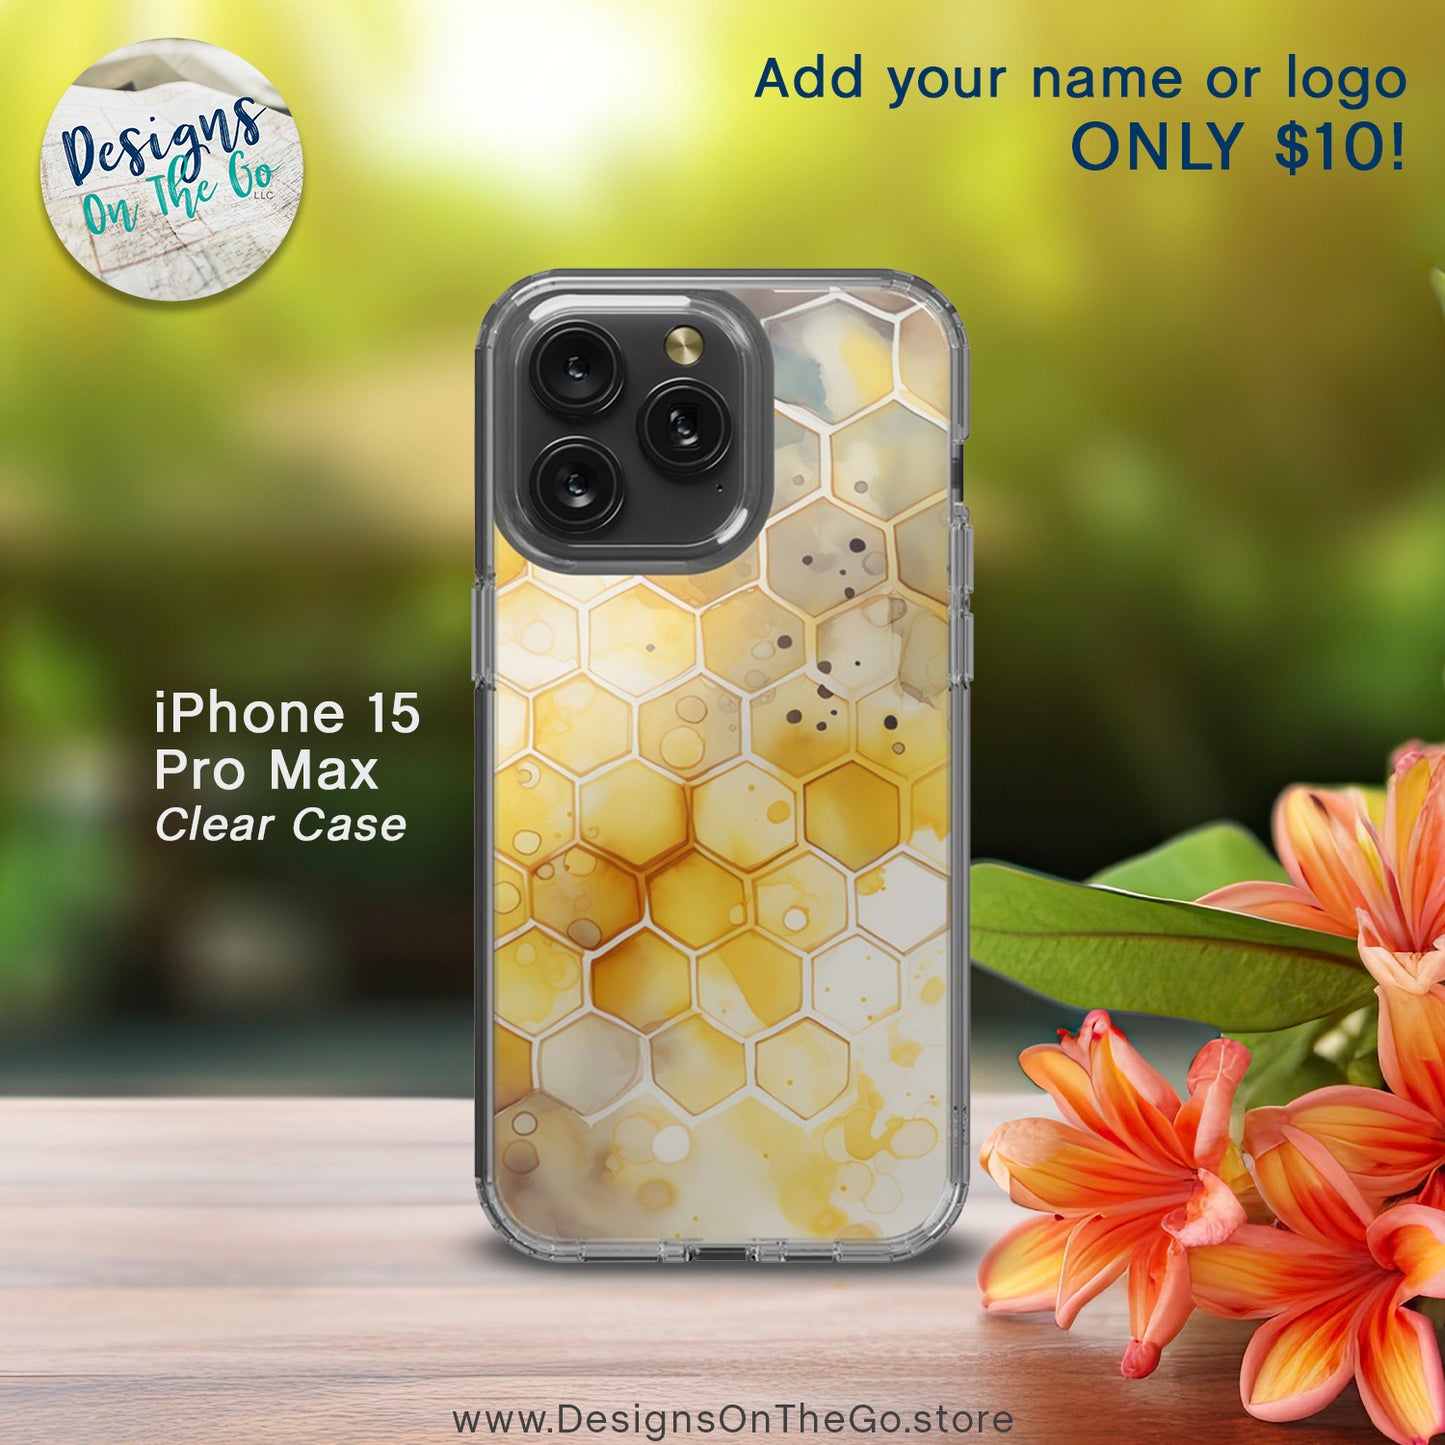 iPhone 15 Pro Max Clear Case - Beehive Splash